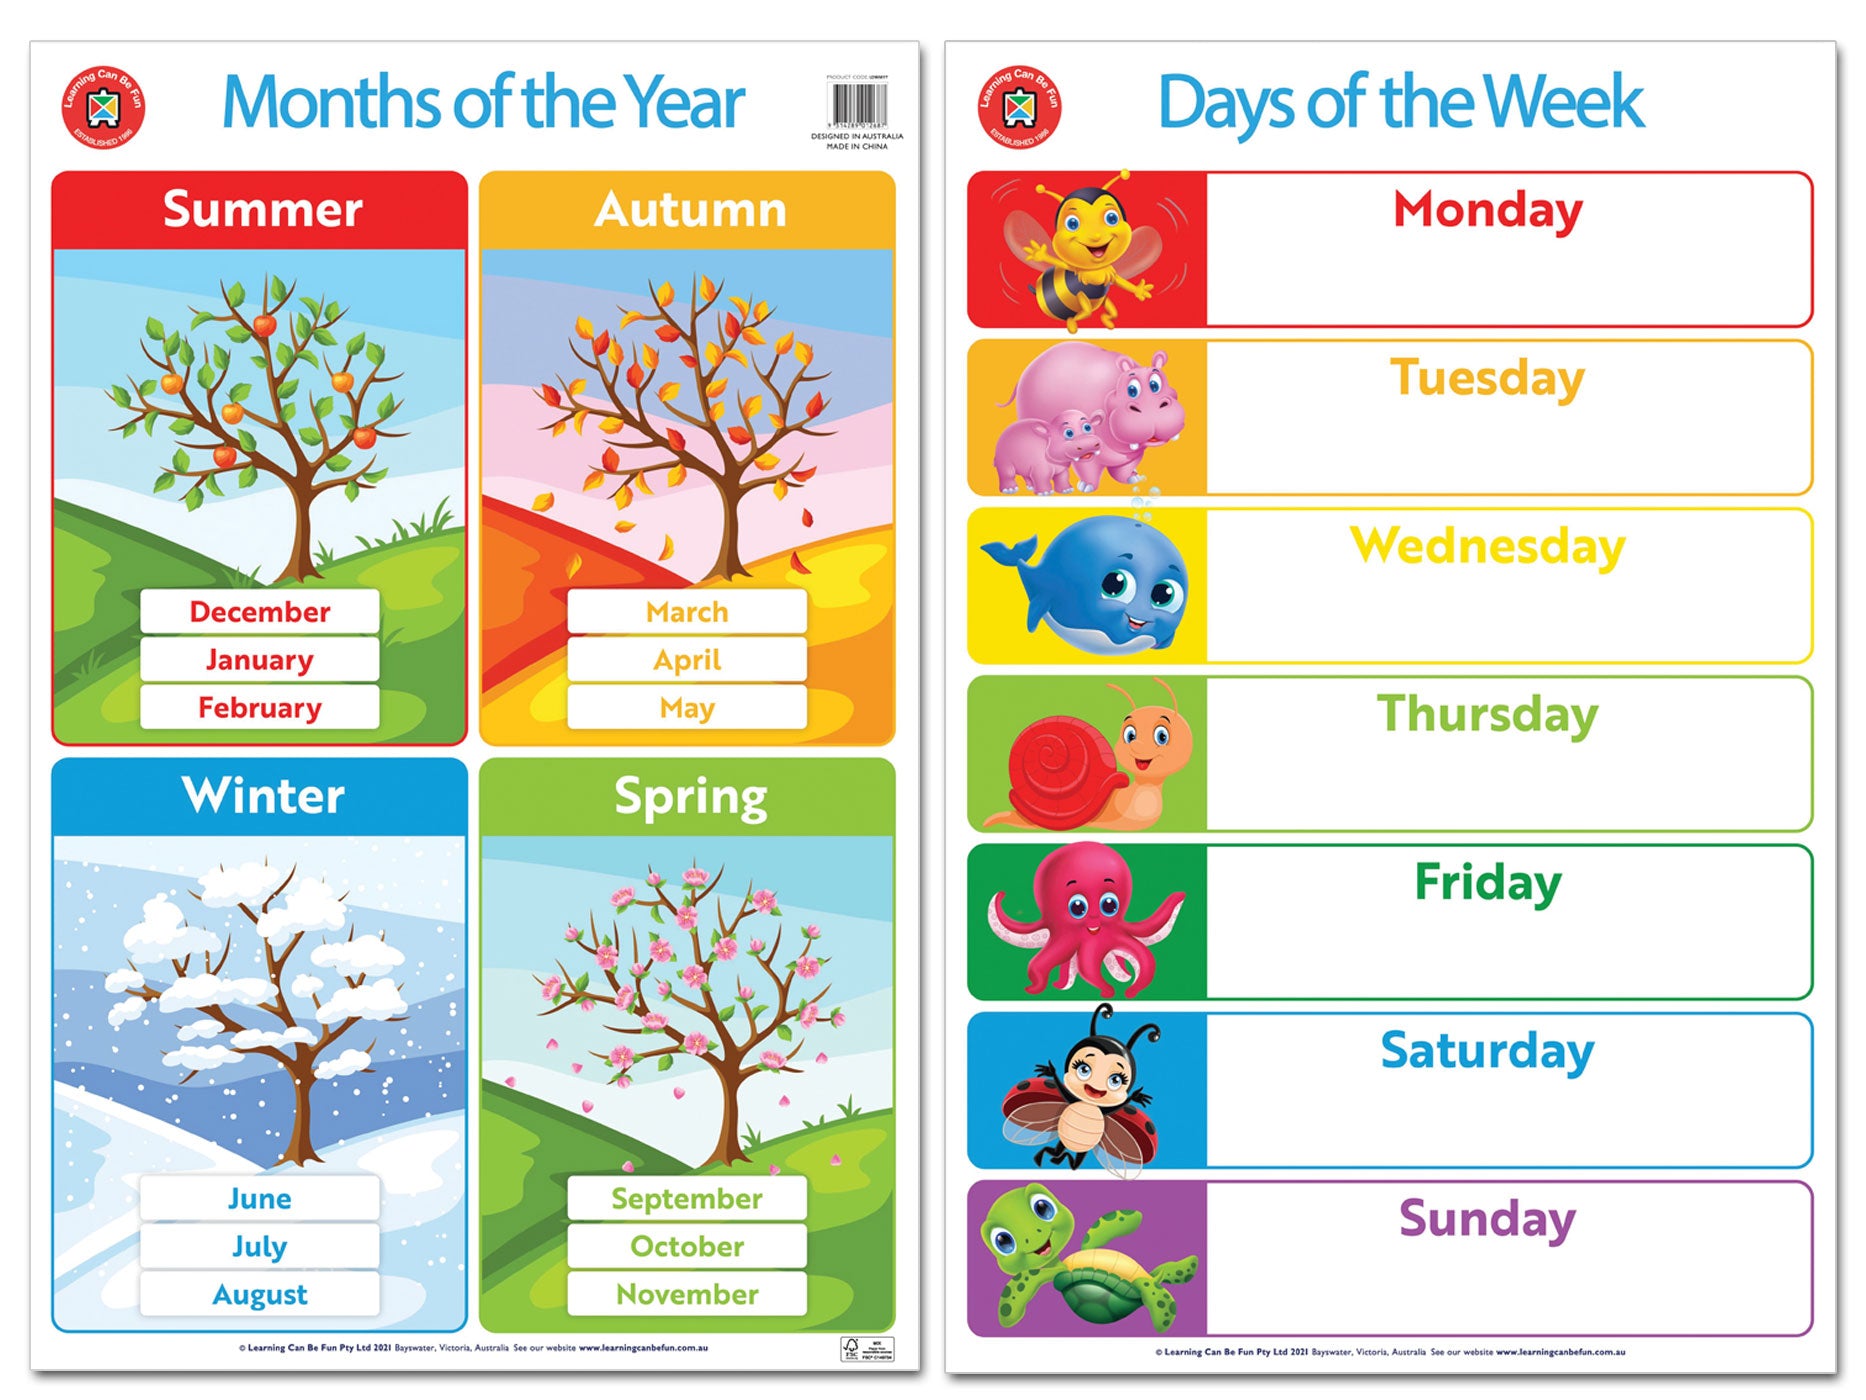 LCBF Wall Chart Days of the Week & Months of the Year Poster 74 x 50cm